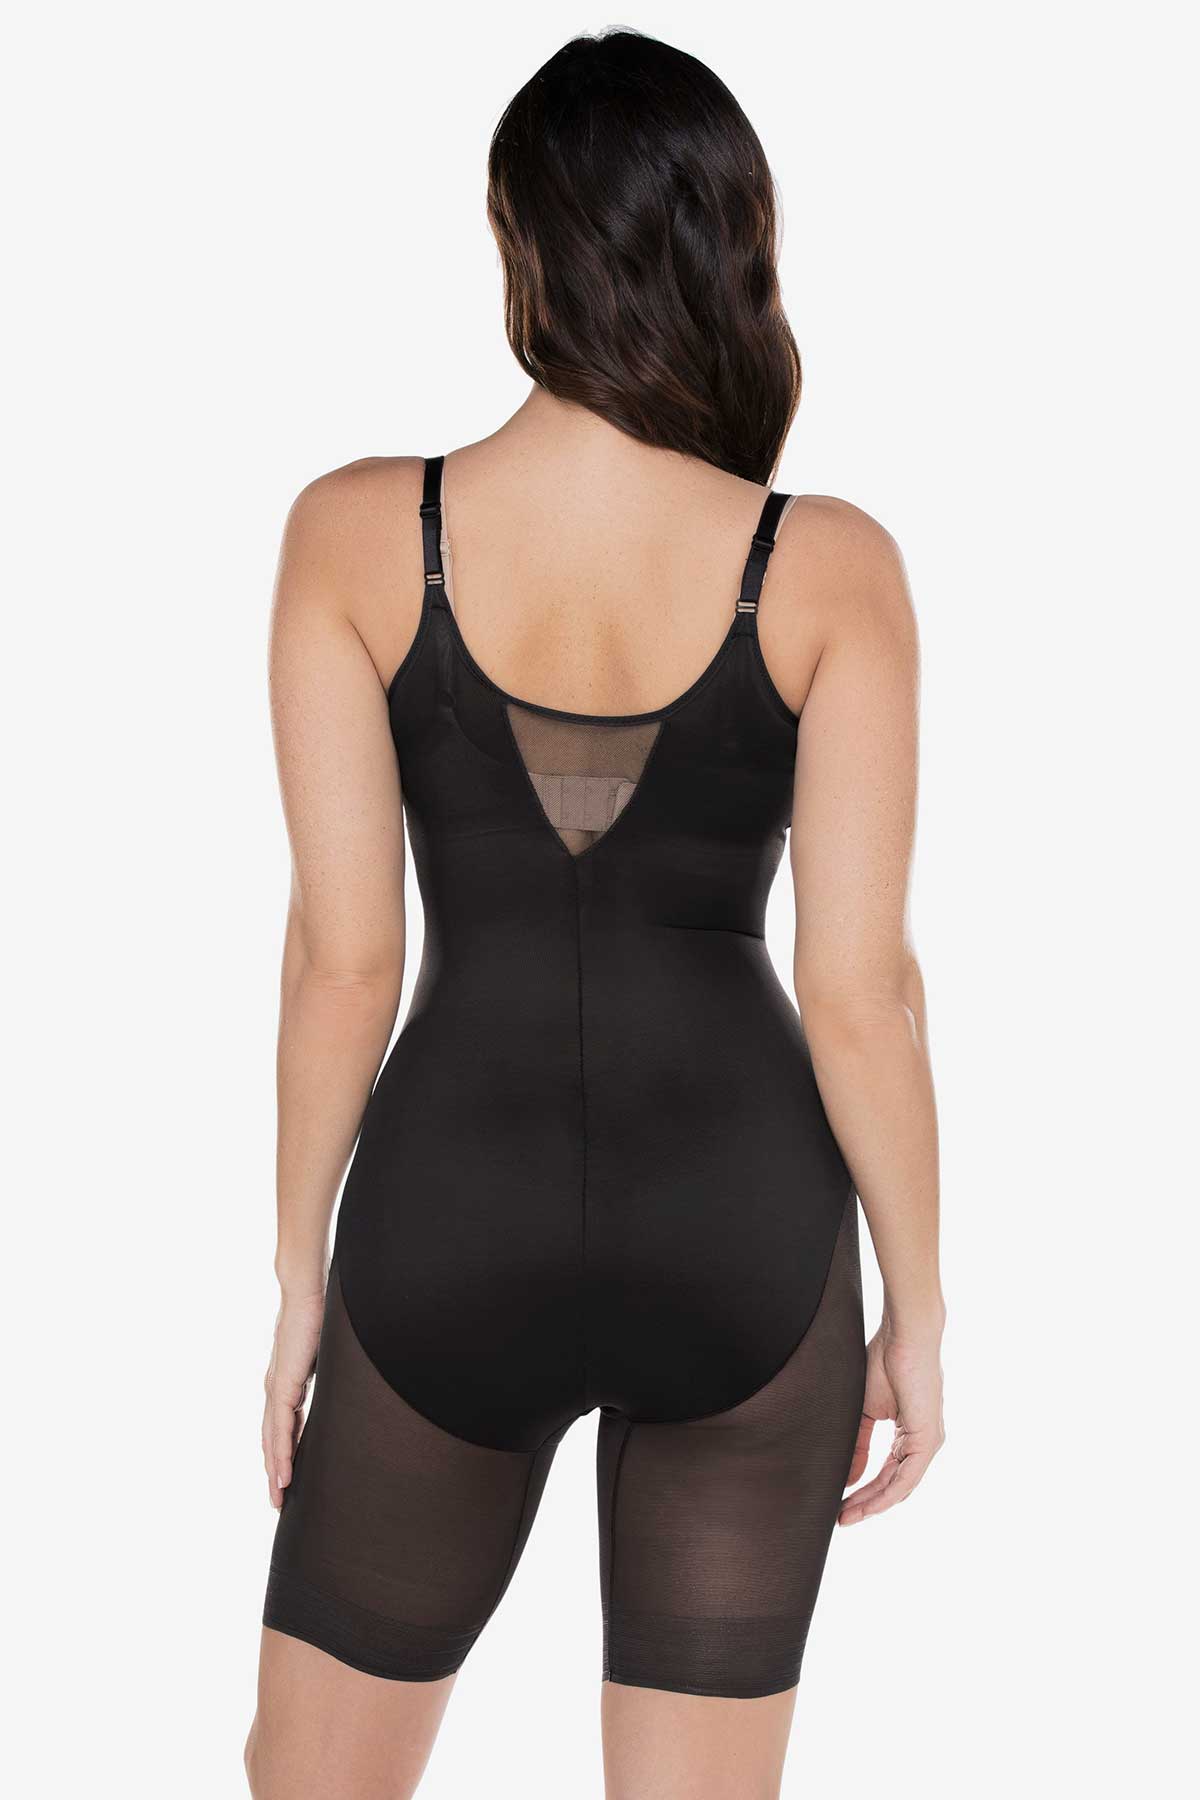 Miraclesuit Sheer Shaping Camisole 2782 Black 34B 